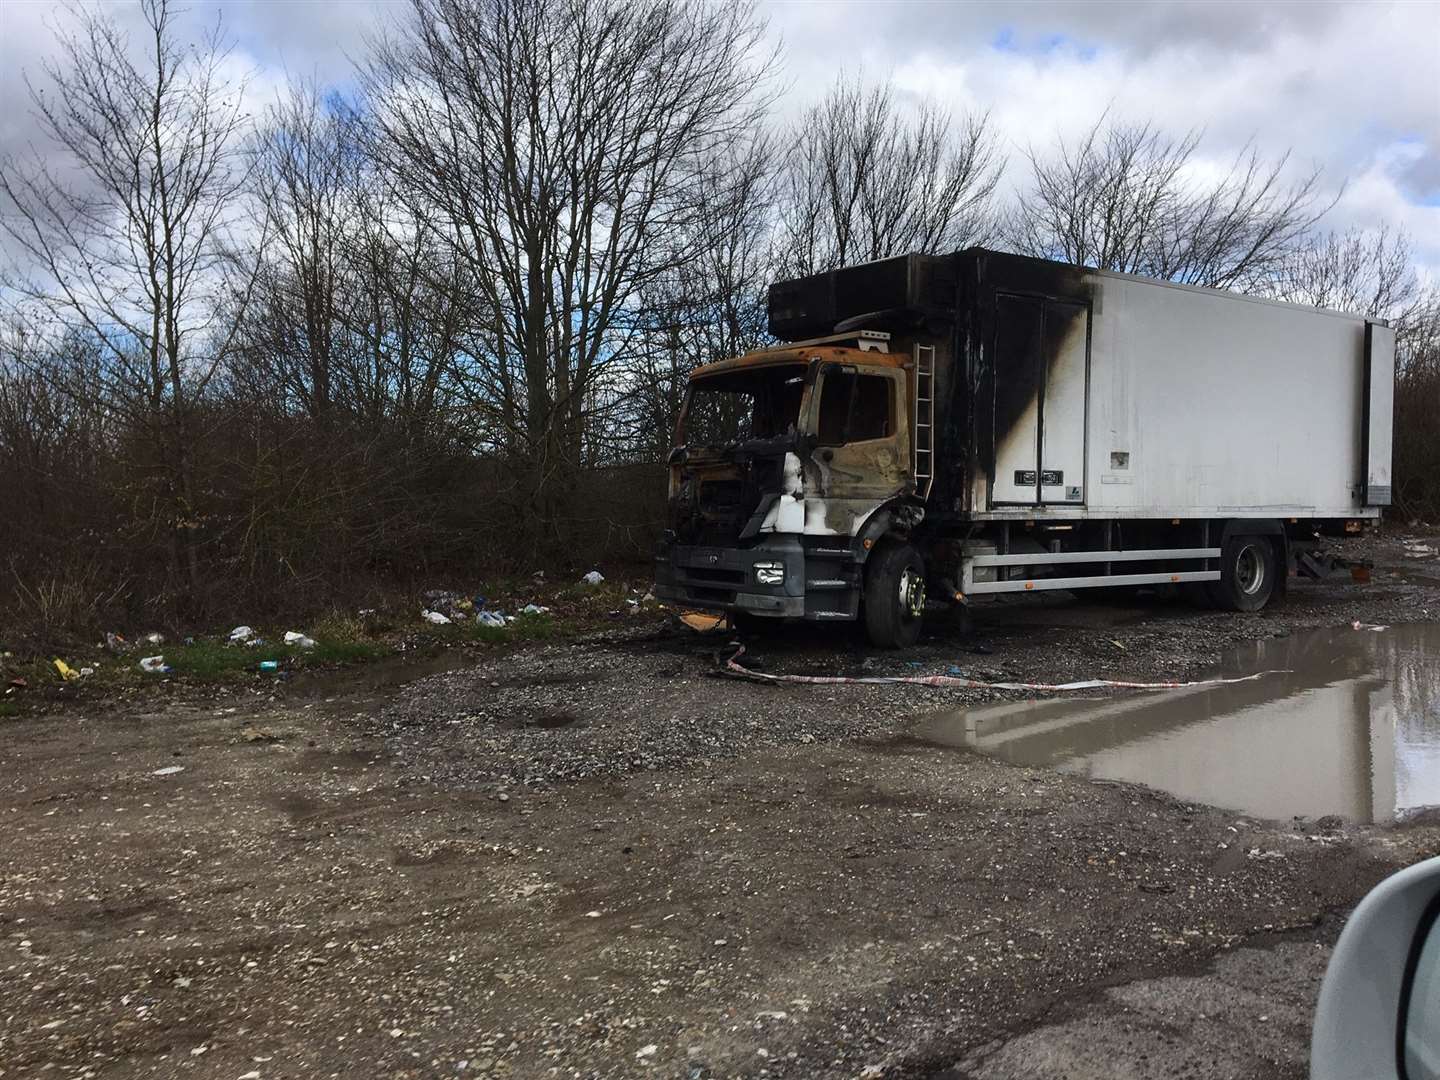 The burnt-out lorry still remains at the lay-by. Picture: David Bax